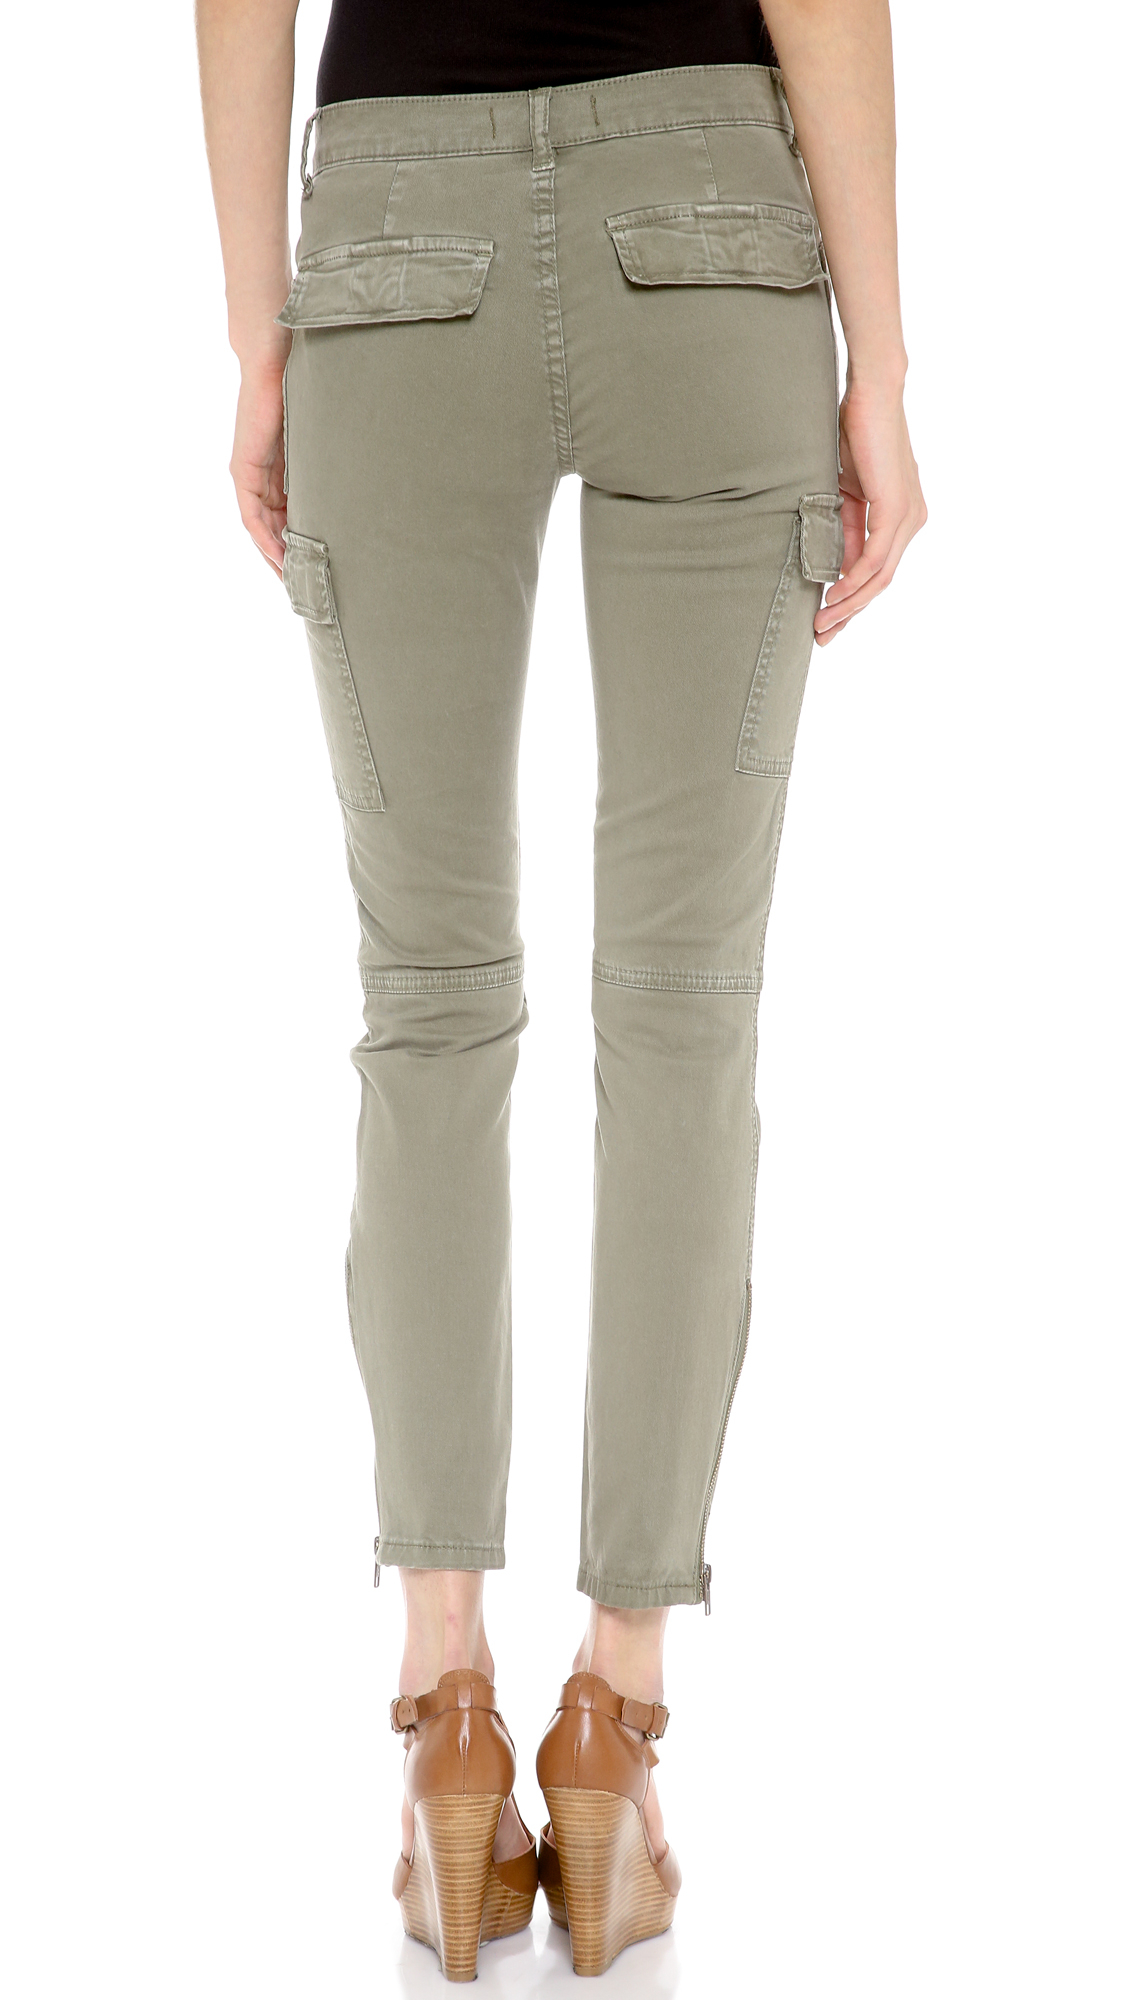 Lyst - Madewell Skinny Ankle Zip Cargo Pants in Green